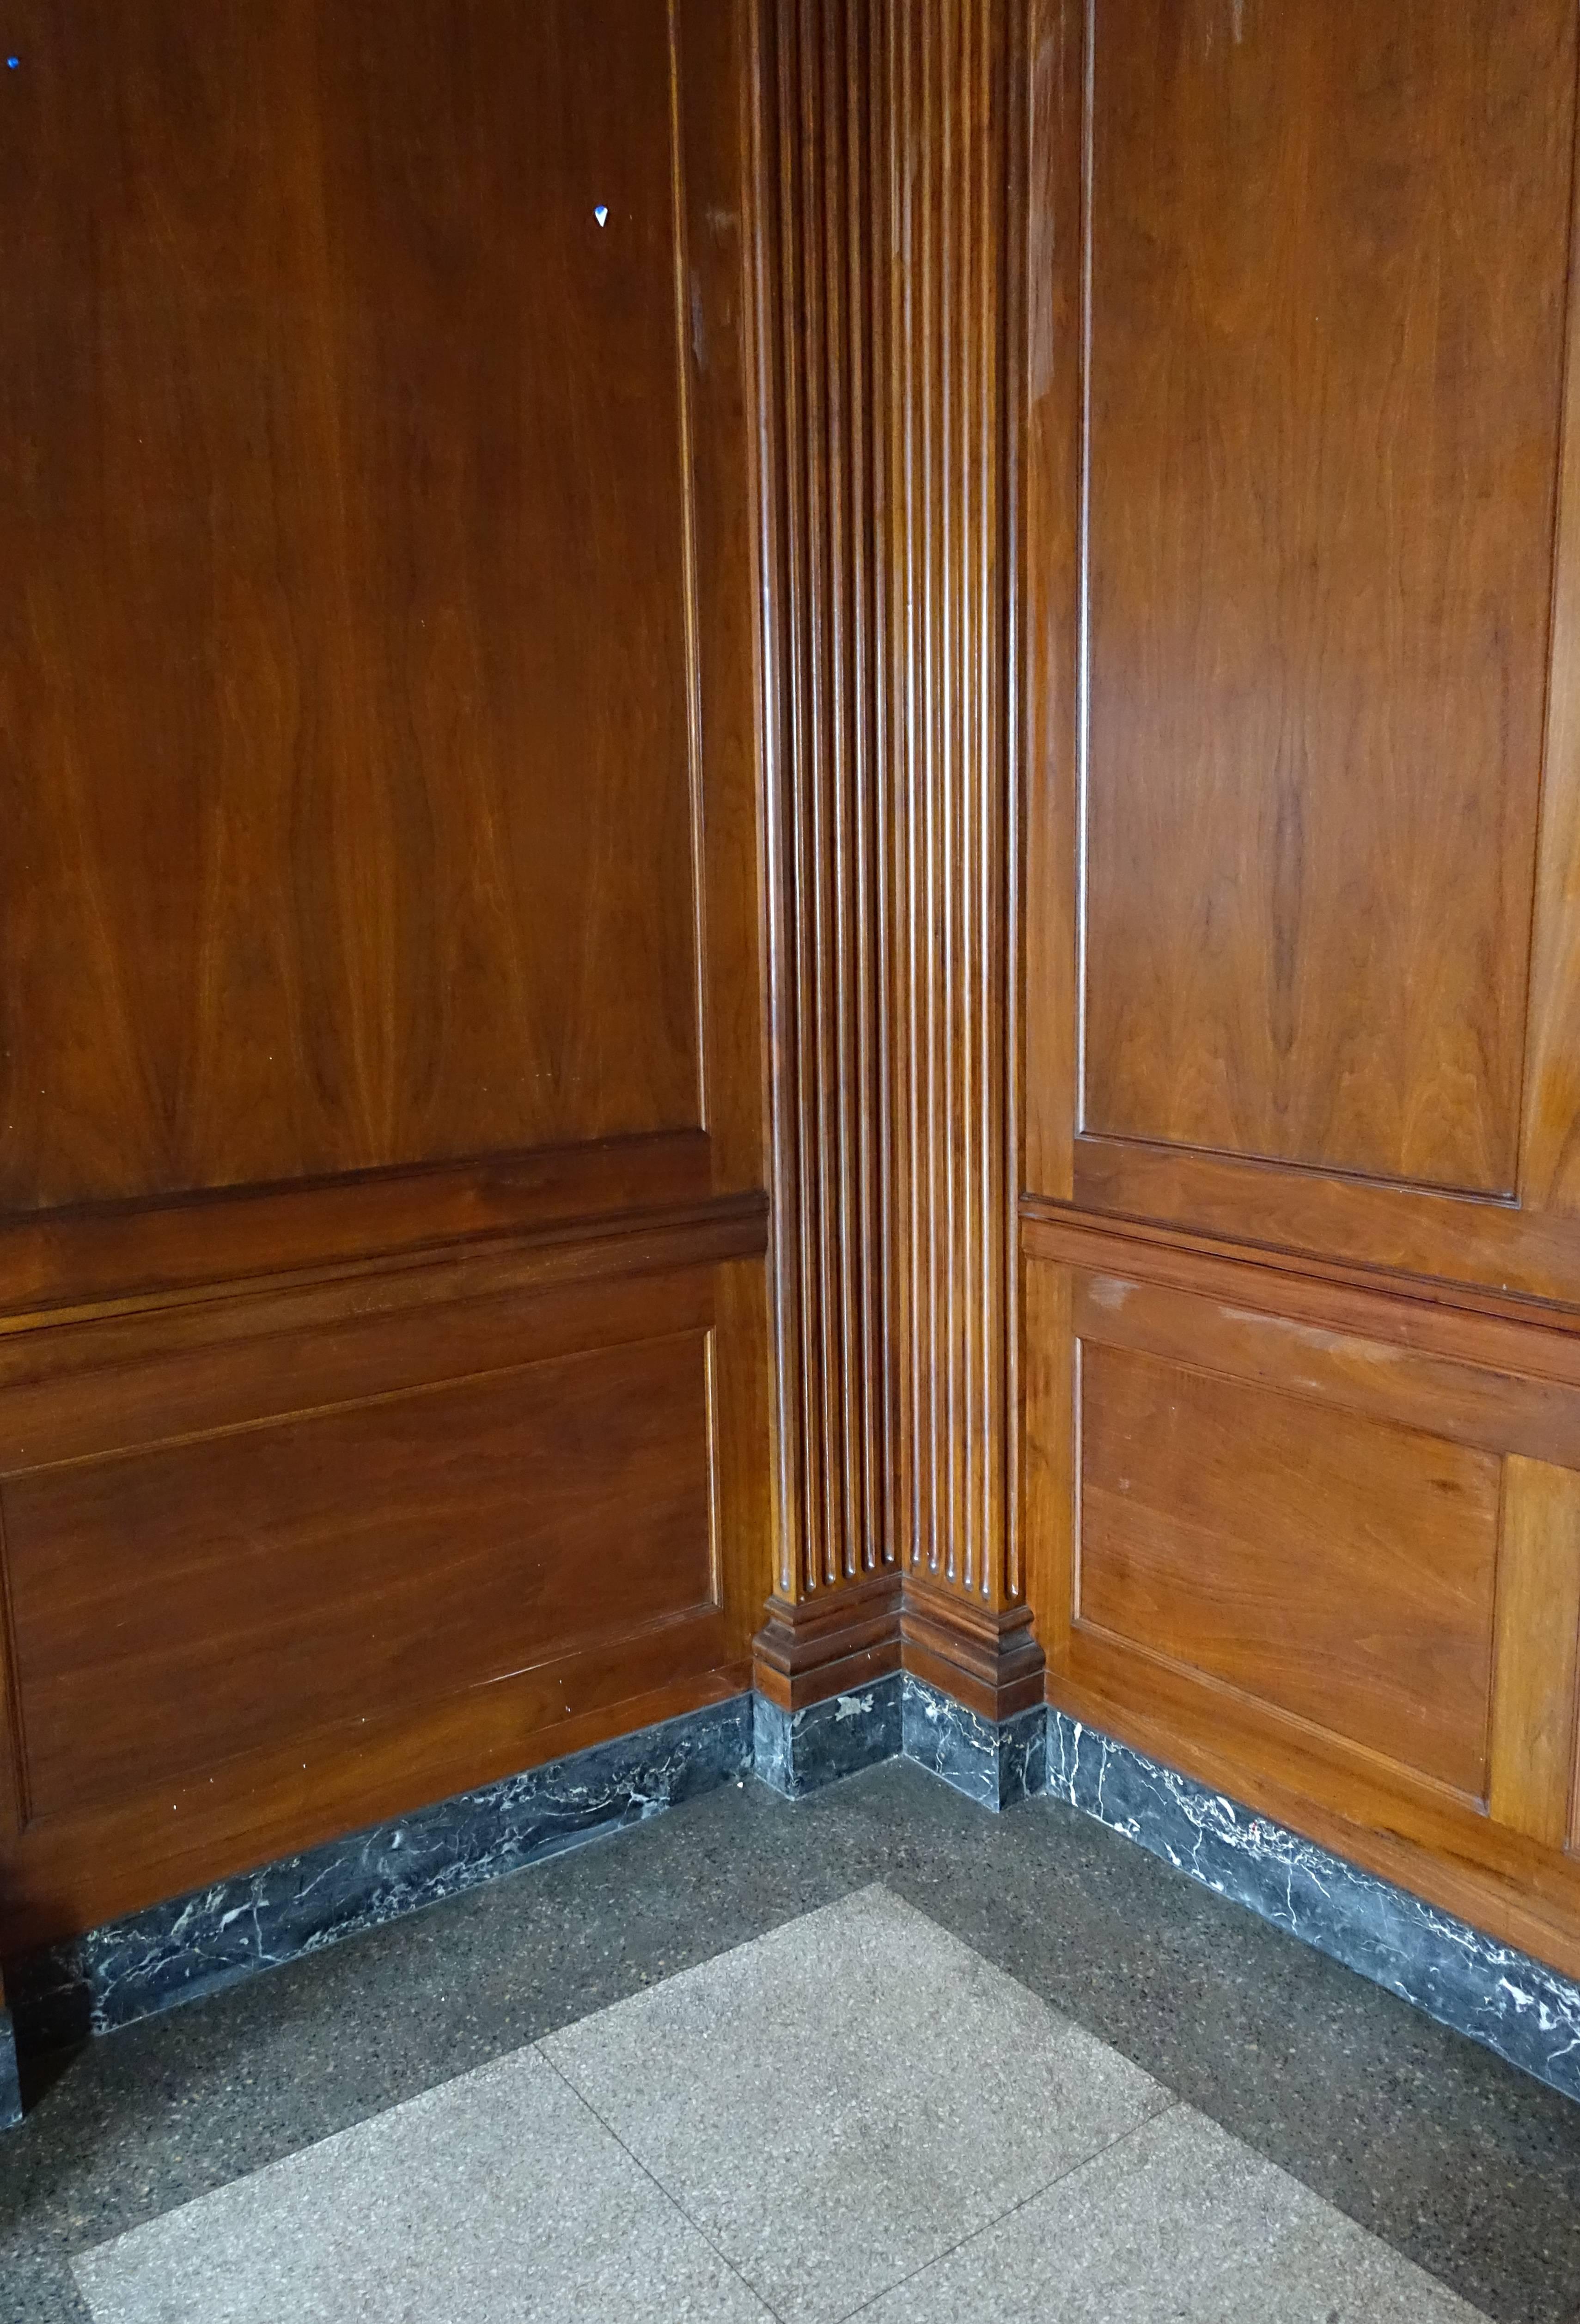 Early 20th Century Neoclassical Walnut Panelled Room and Mantel from the Williamsburg Savings Bank